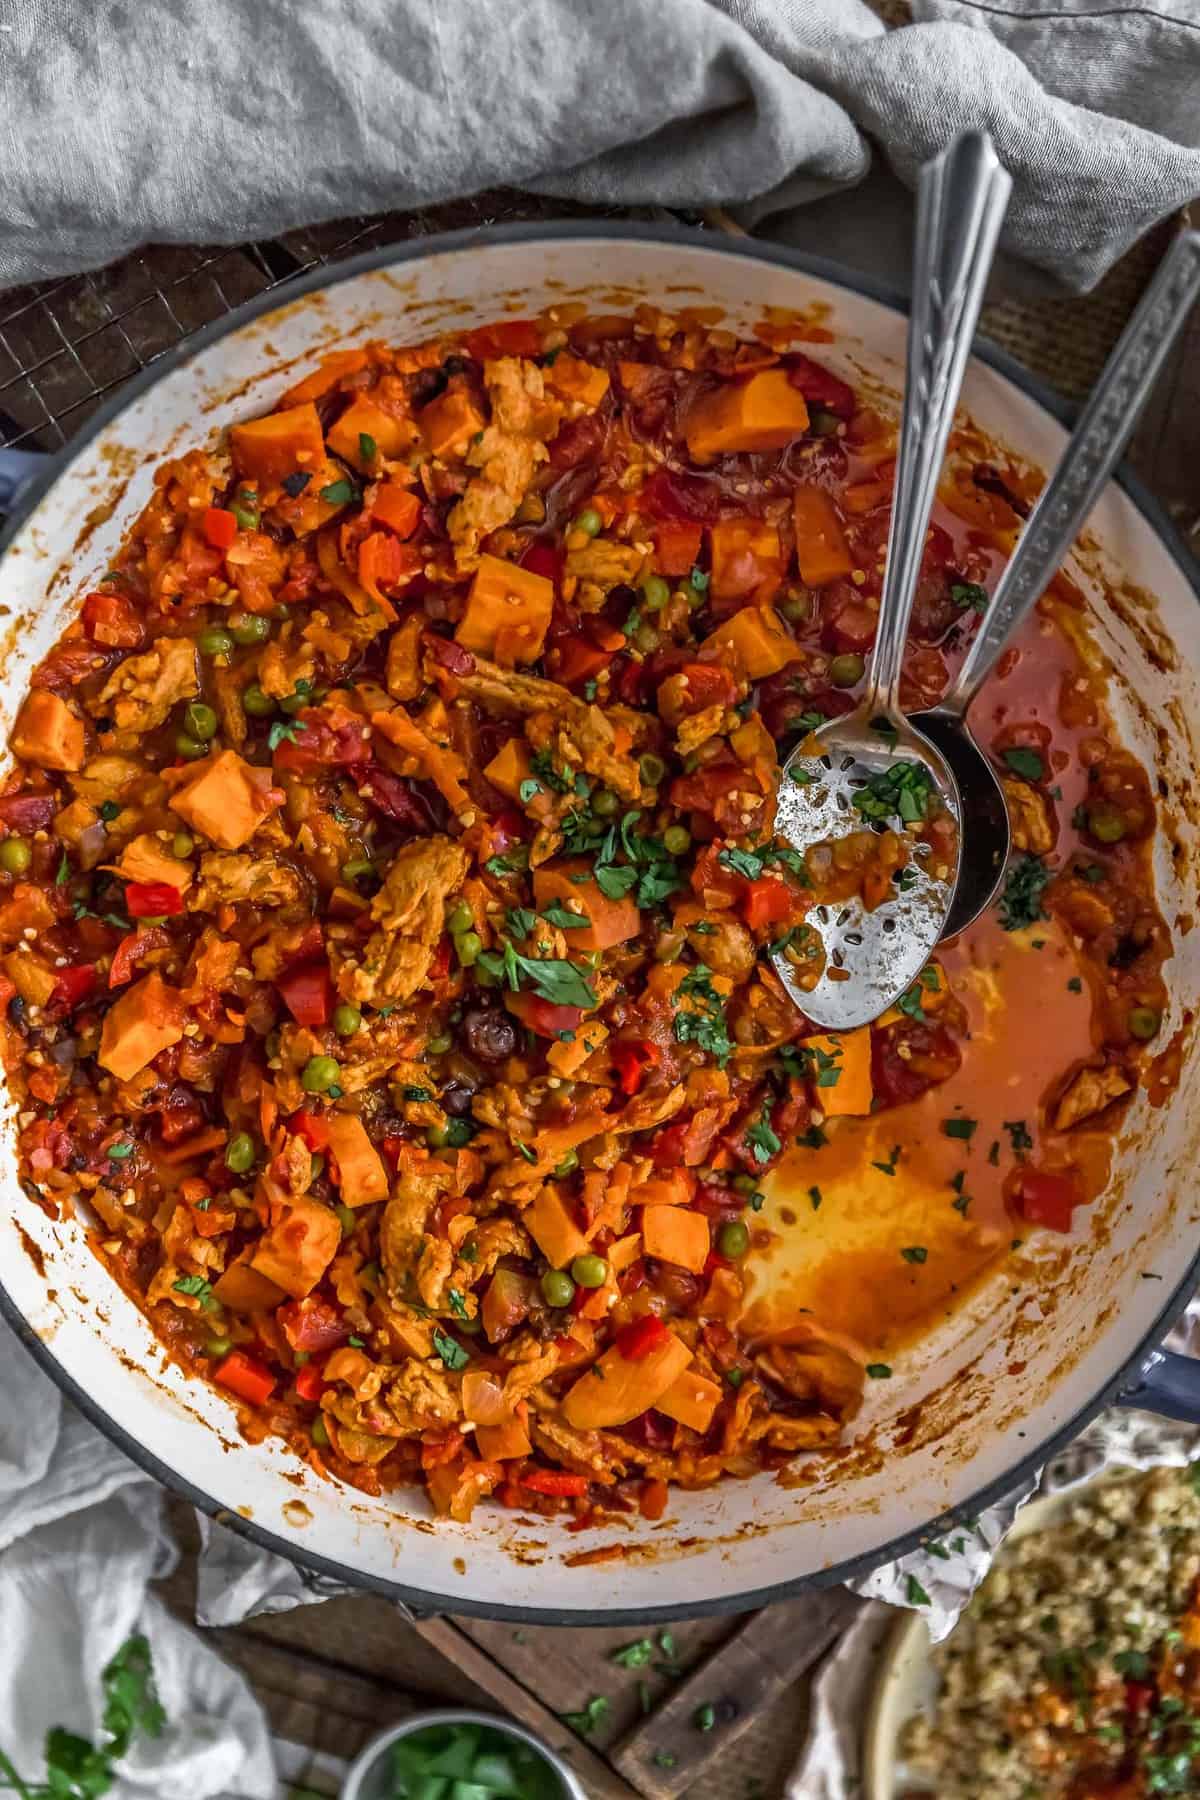 Skillet of Moroccan Soy Curl Stew